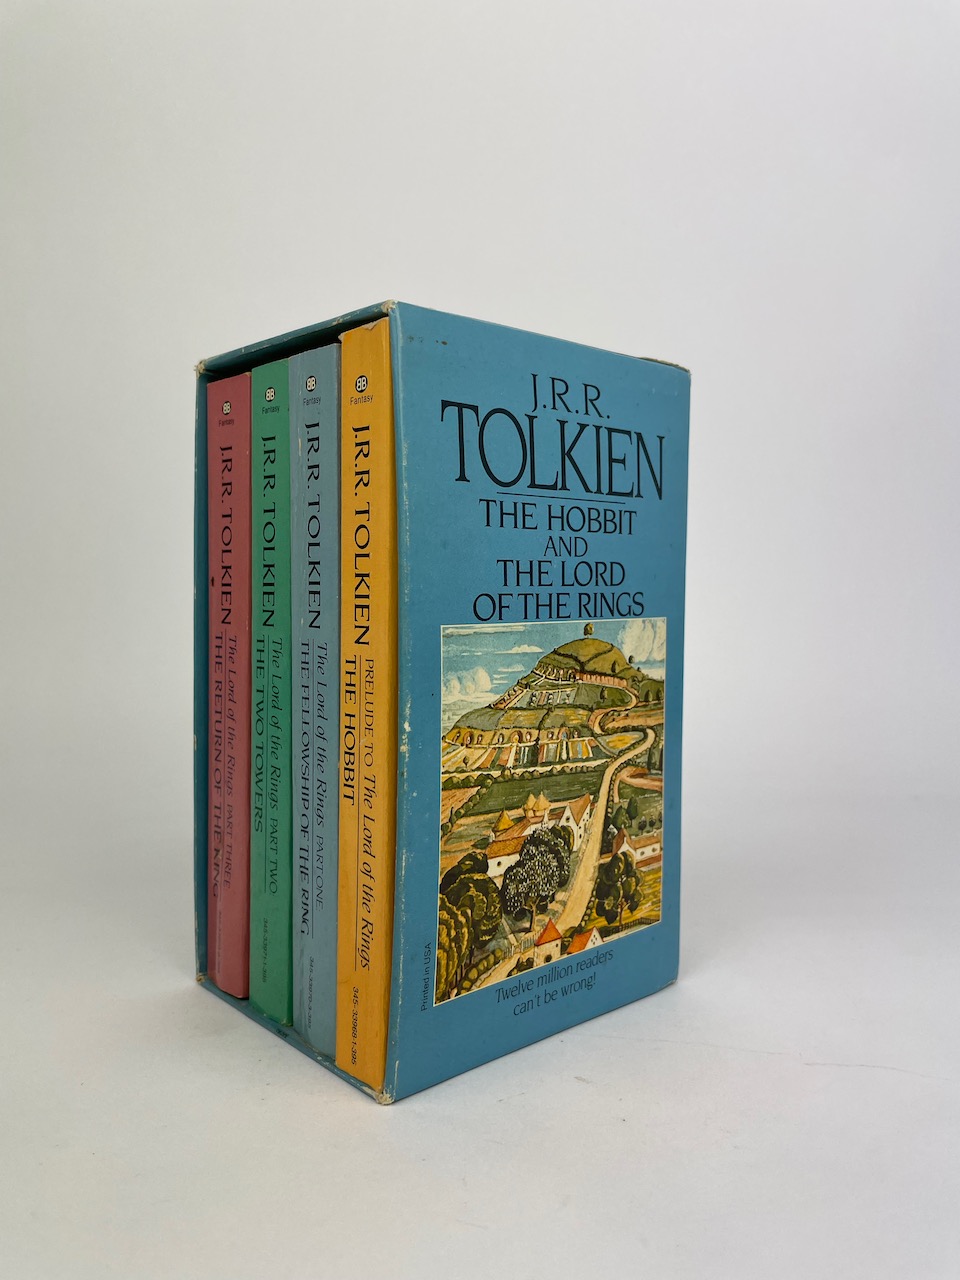 The Hobbit and The Lord of the Rings, Four Paperback Book Boxset from 1986, Blue Slipcase art by J.R.R. Tolkien 3